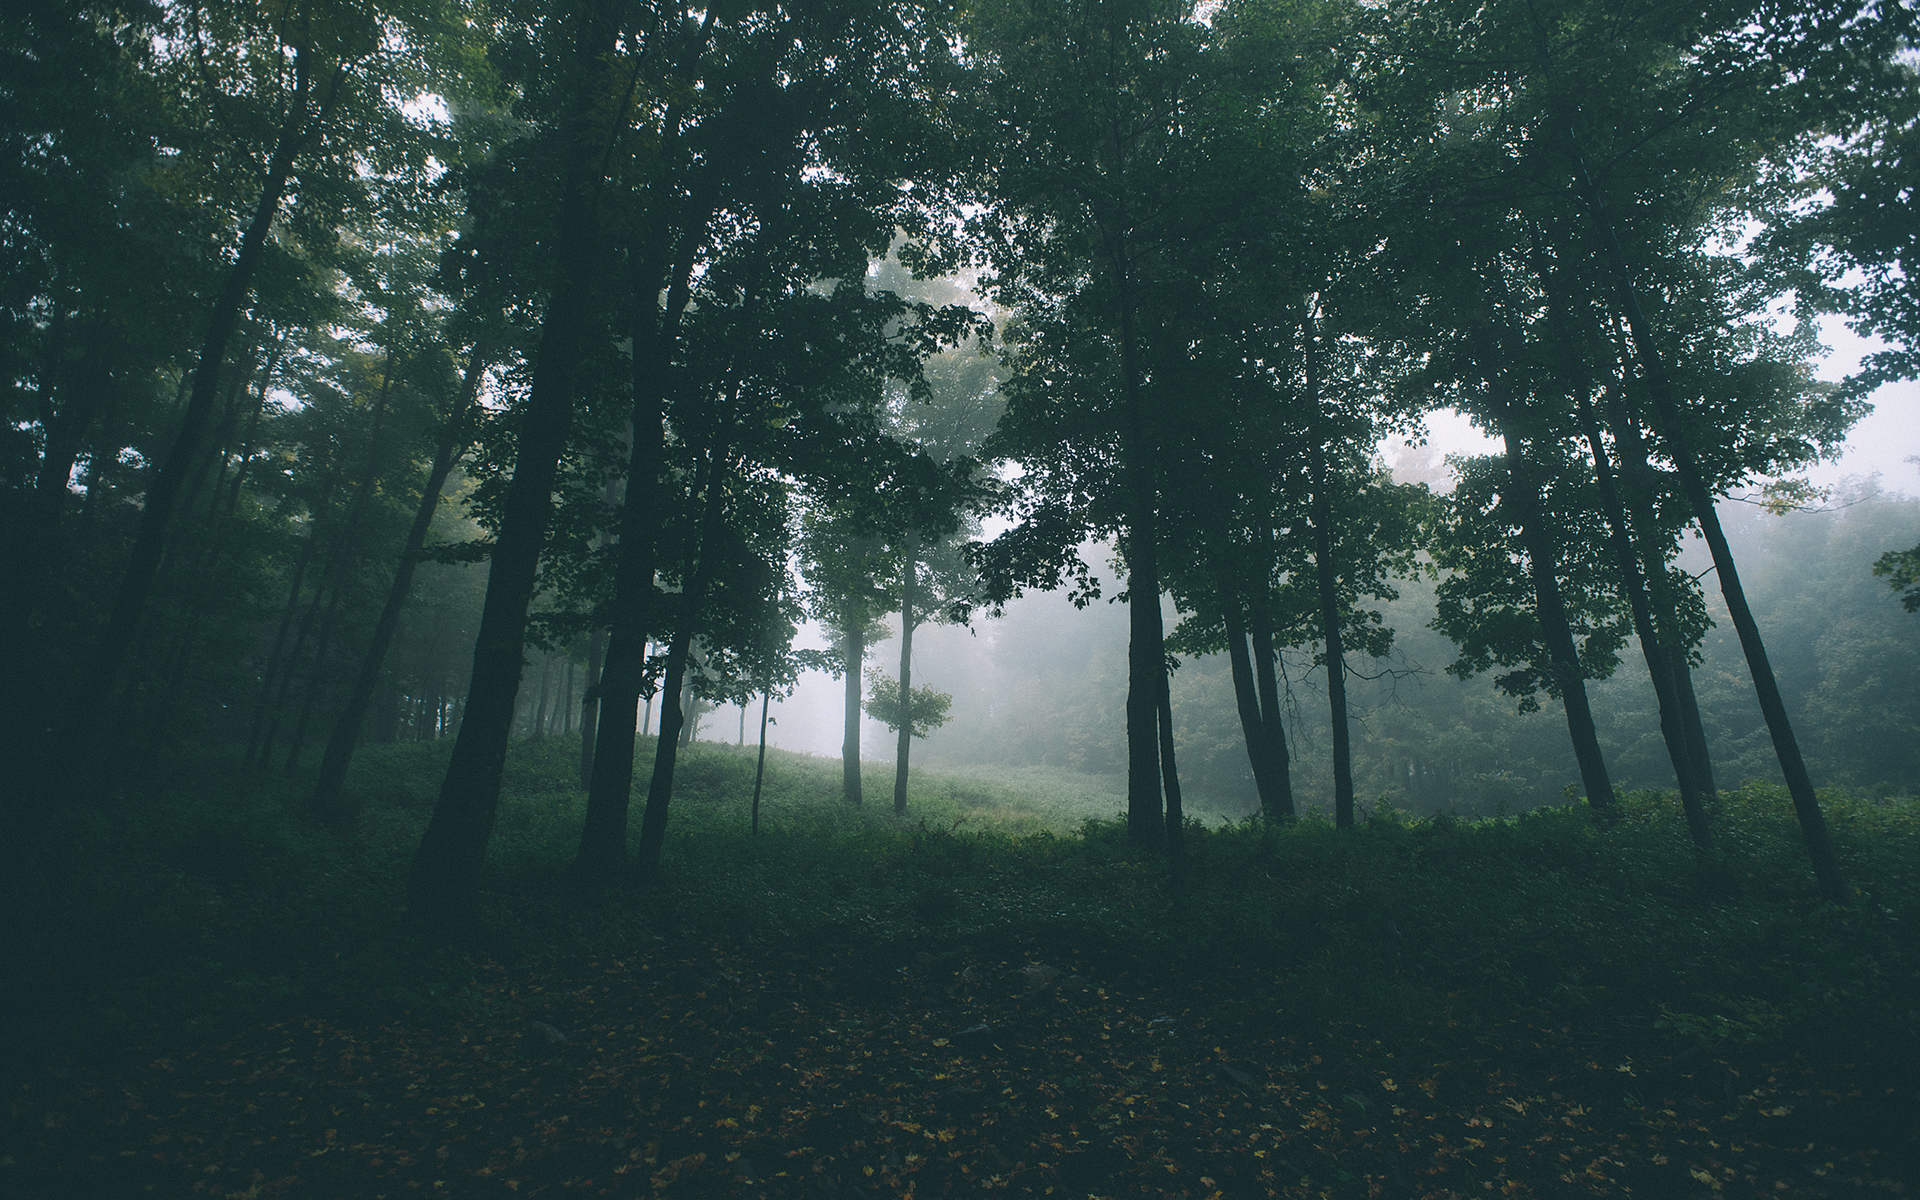 Weekly Wallpaper: Take A Walk Through The Forest